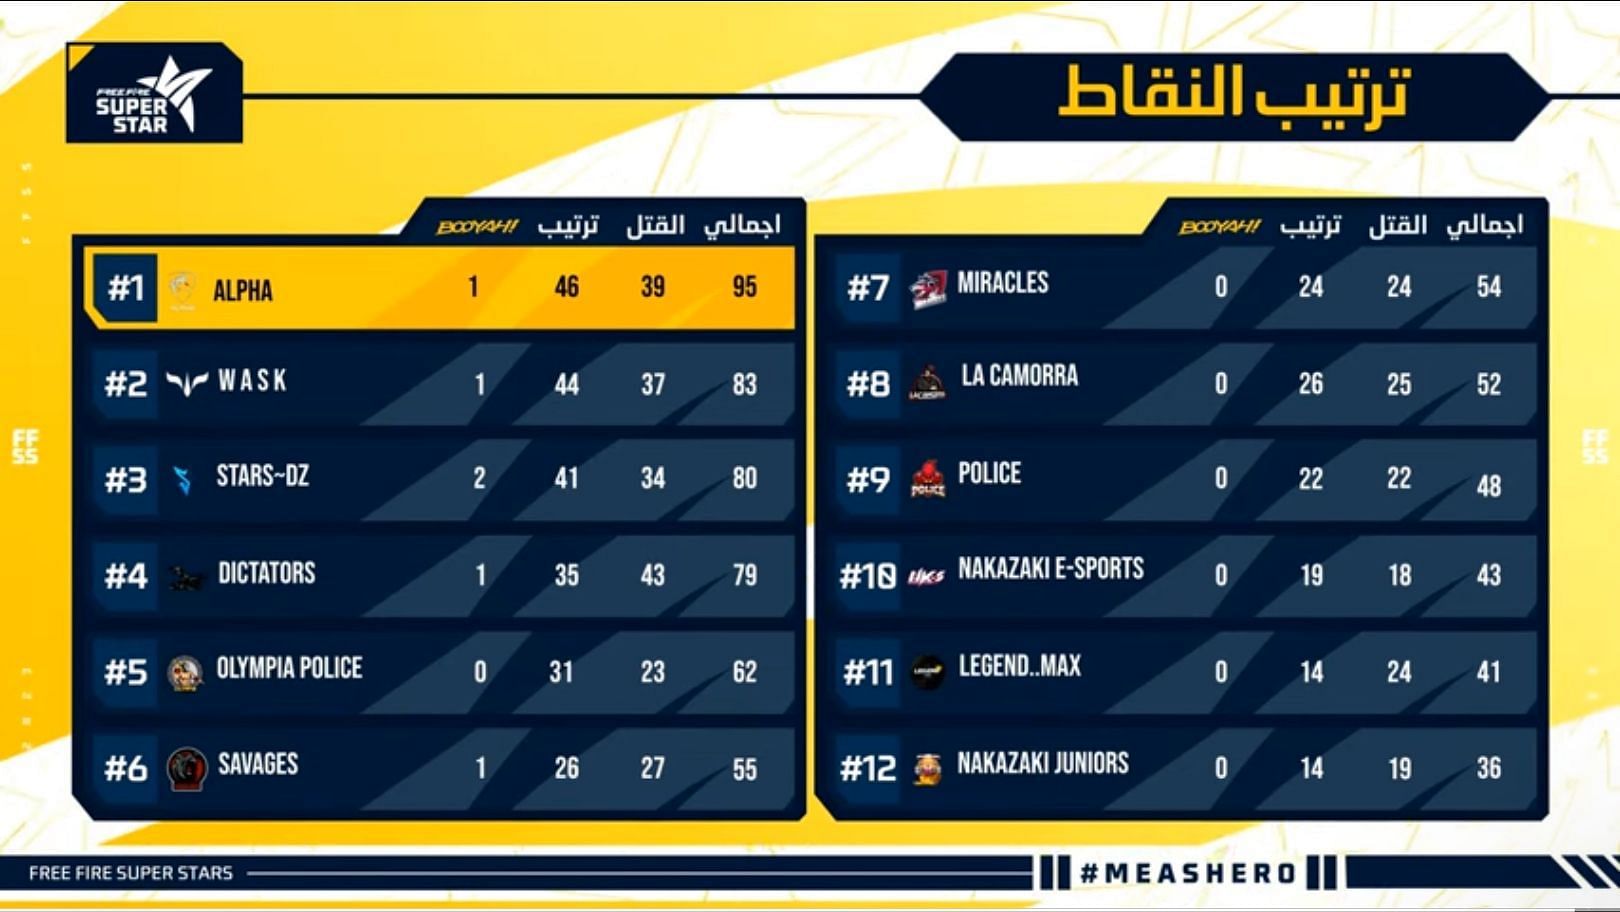 Overall points table of Super Star Grand Finals (Image via Free Fire)